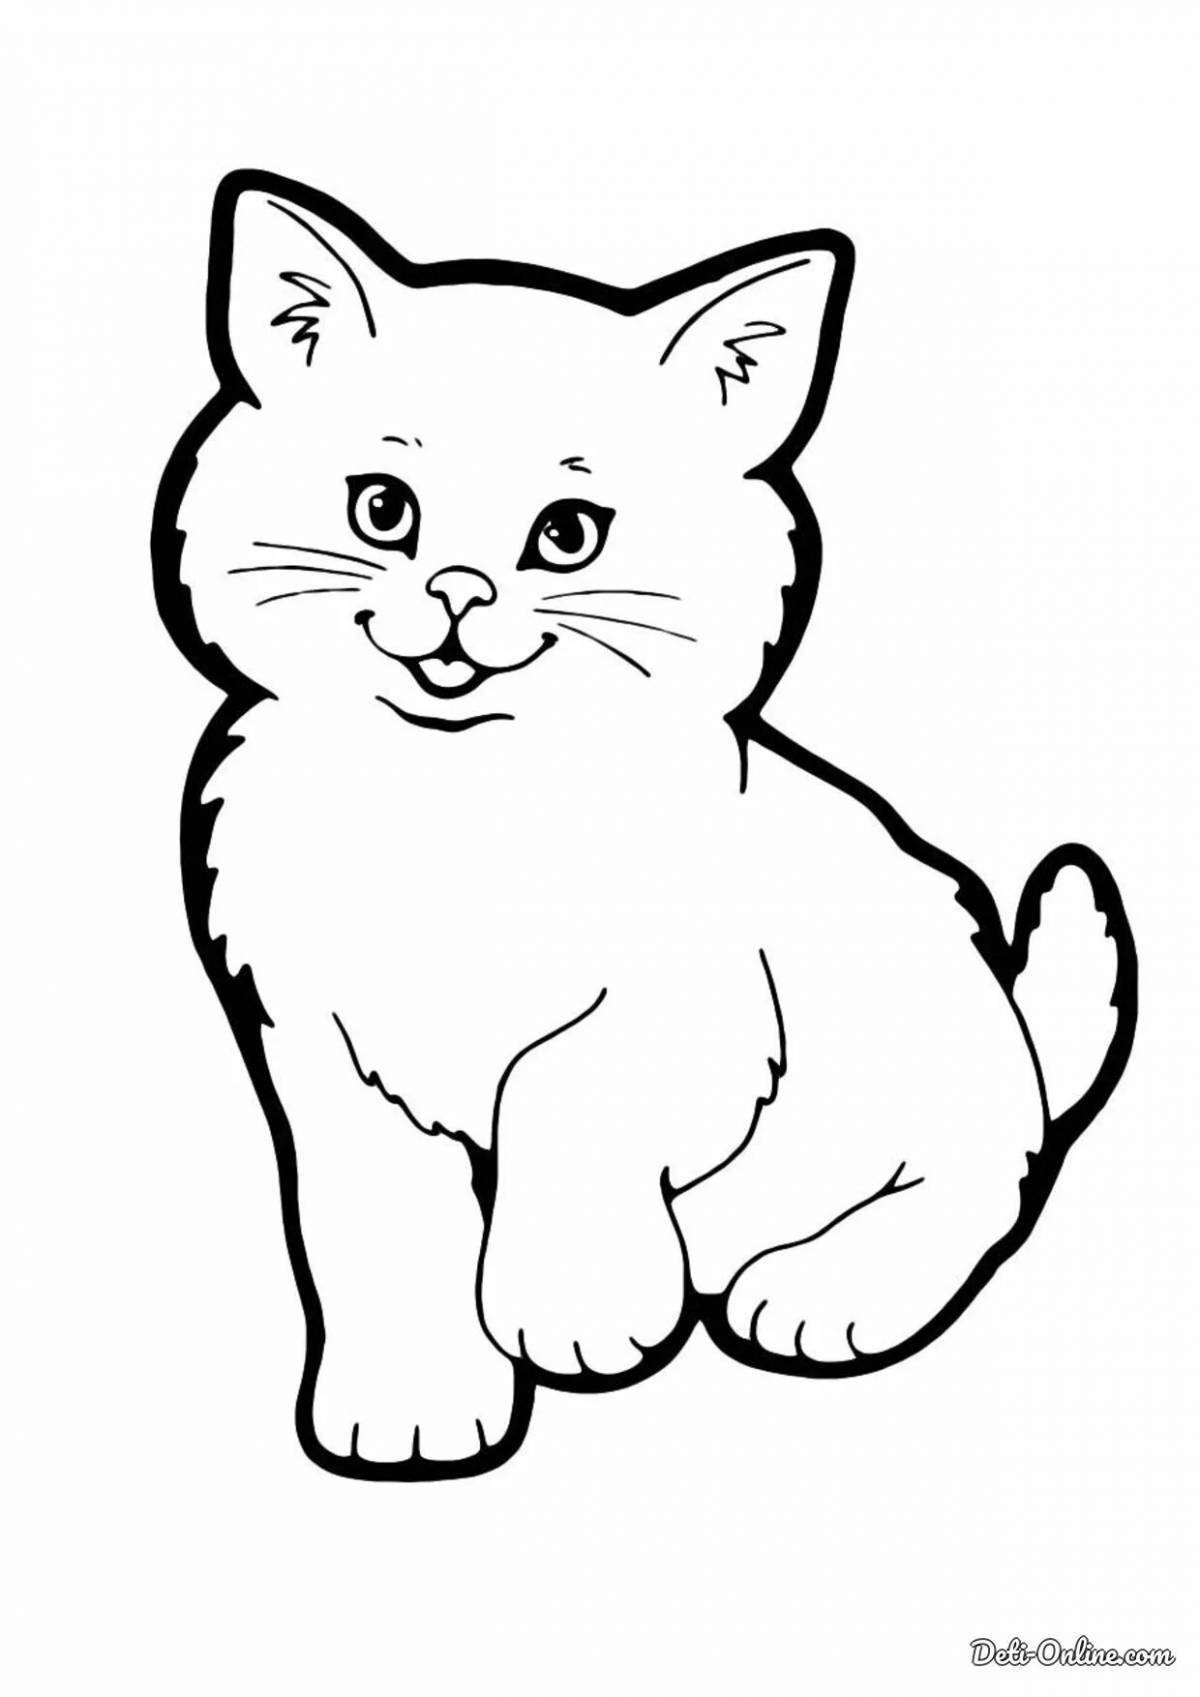 Glowing kitty coloring book for children 2-3 years old